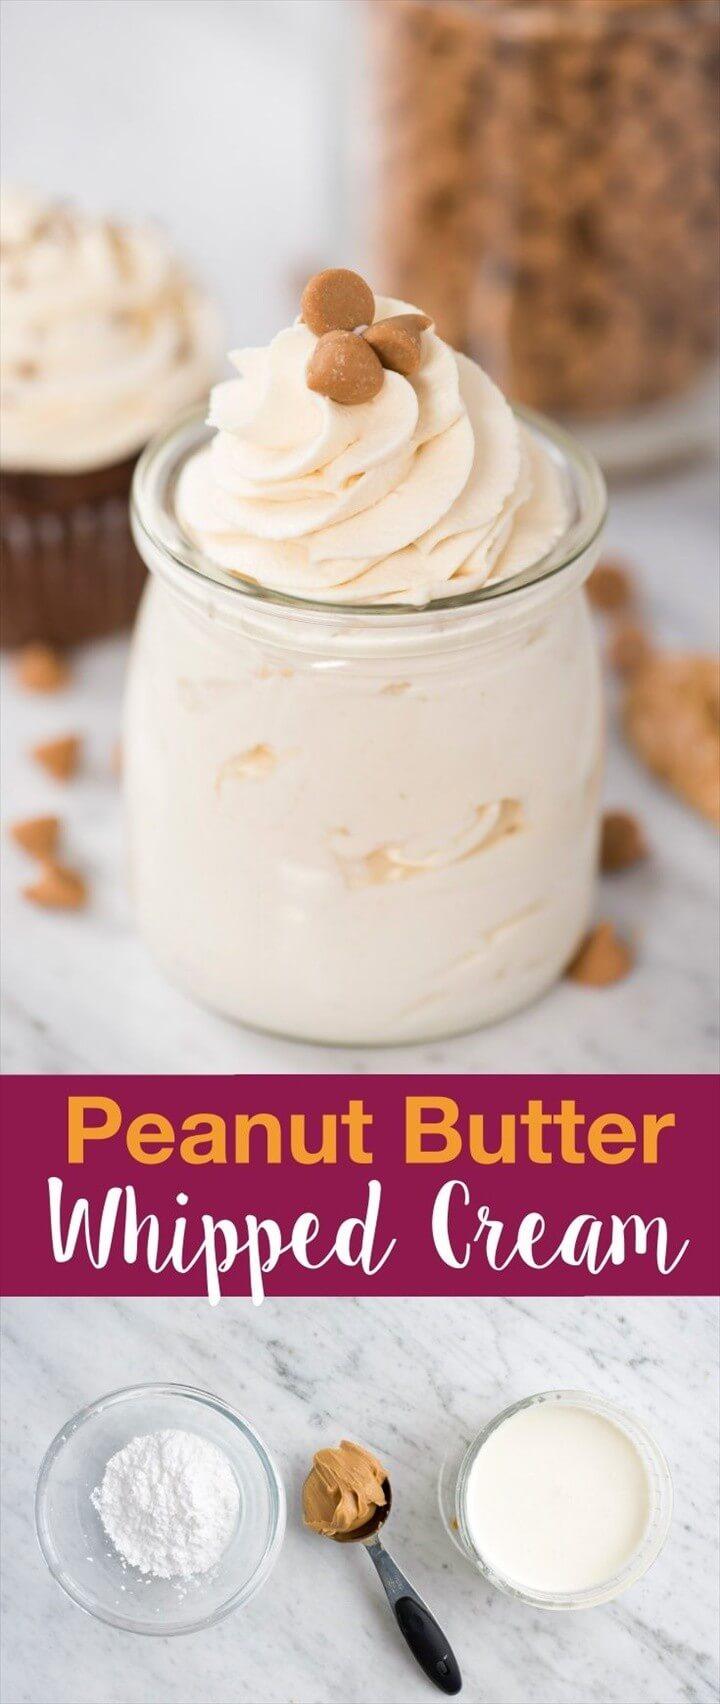 Easy To Make Peanut Butter Whipped Cream Frosting